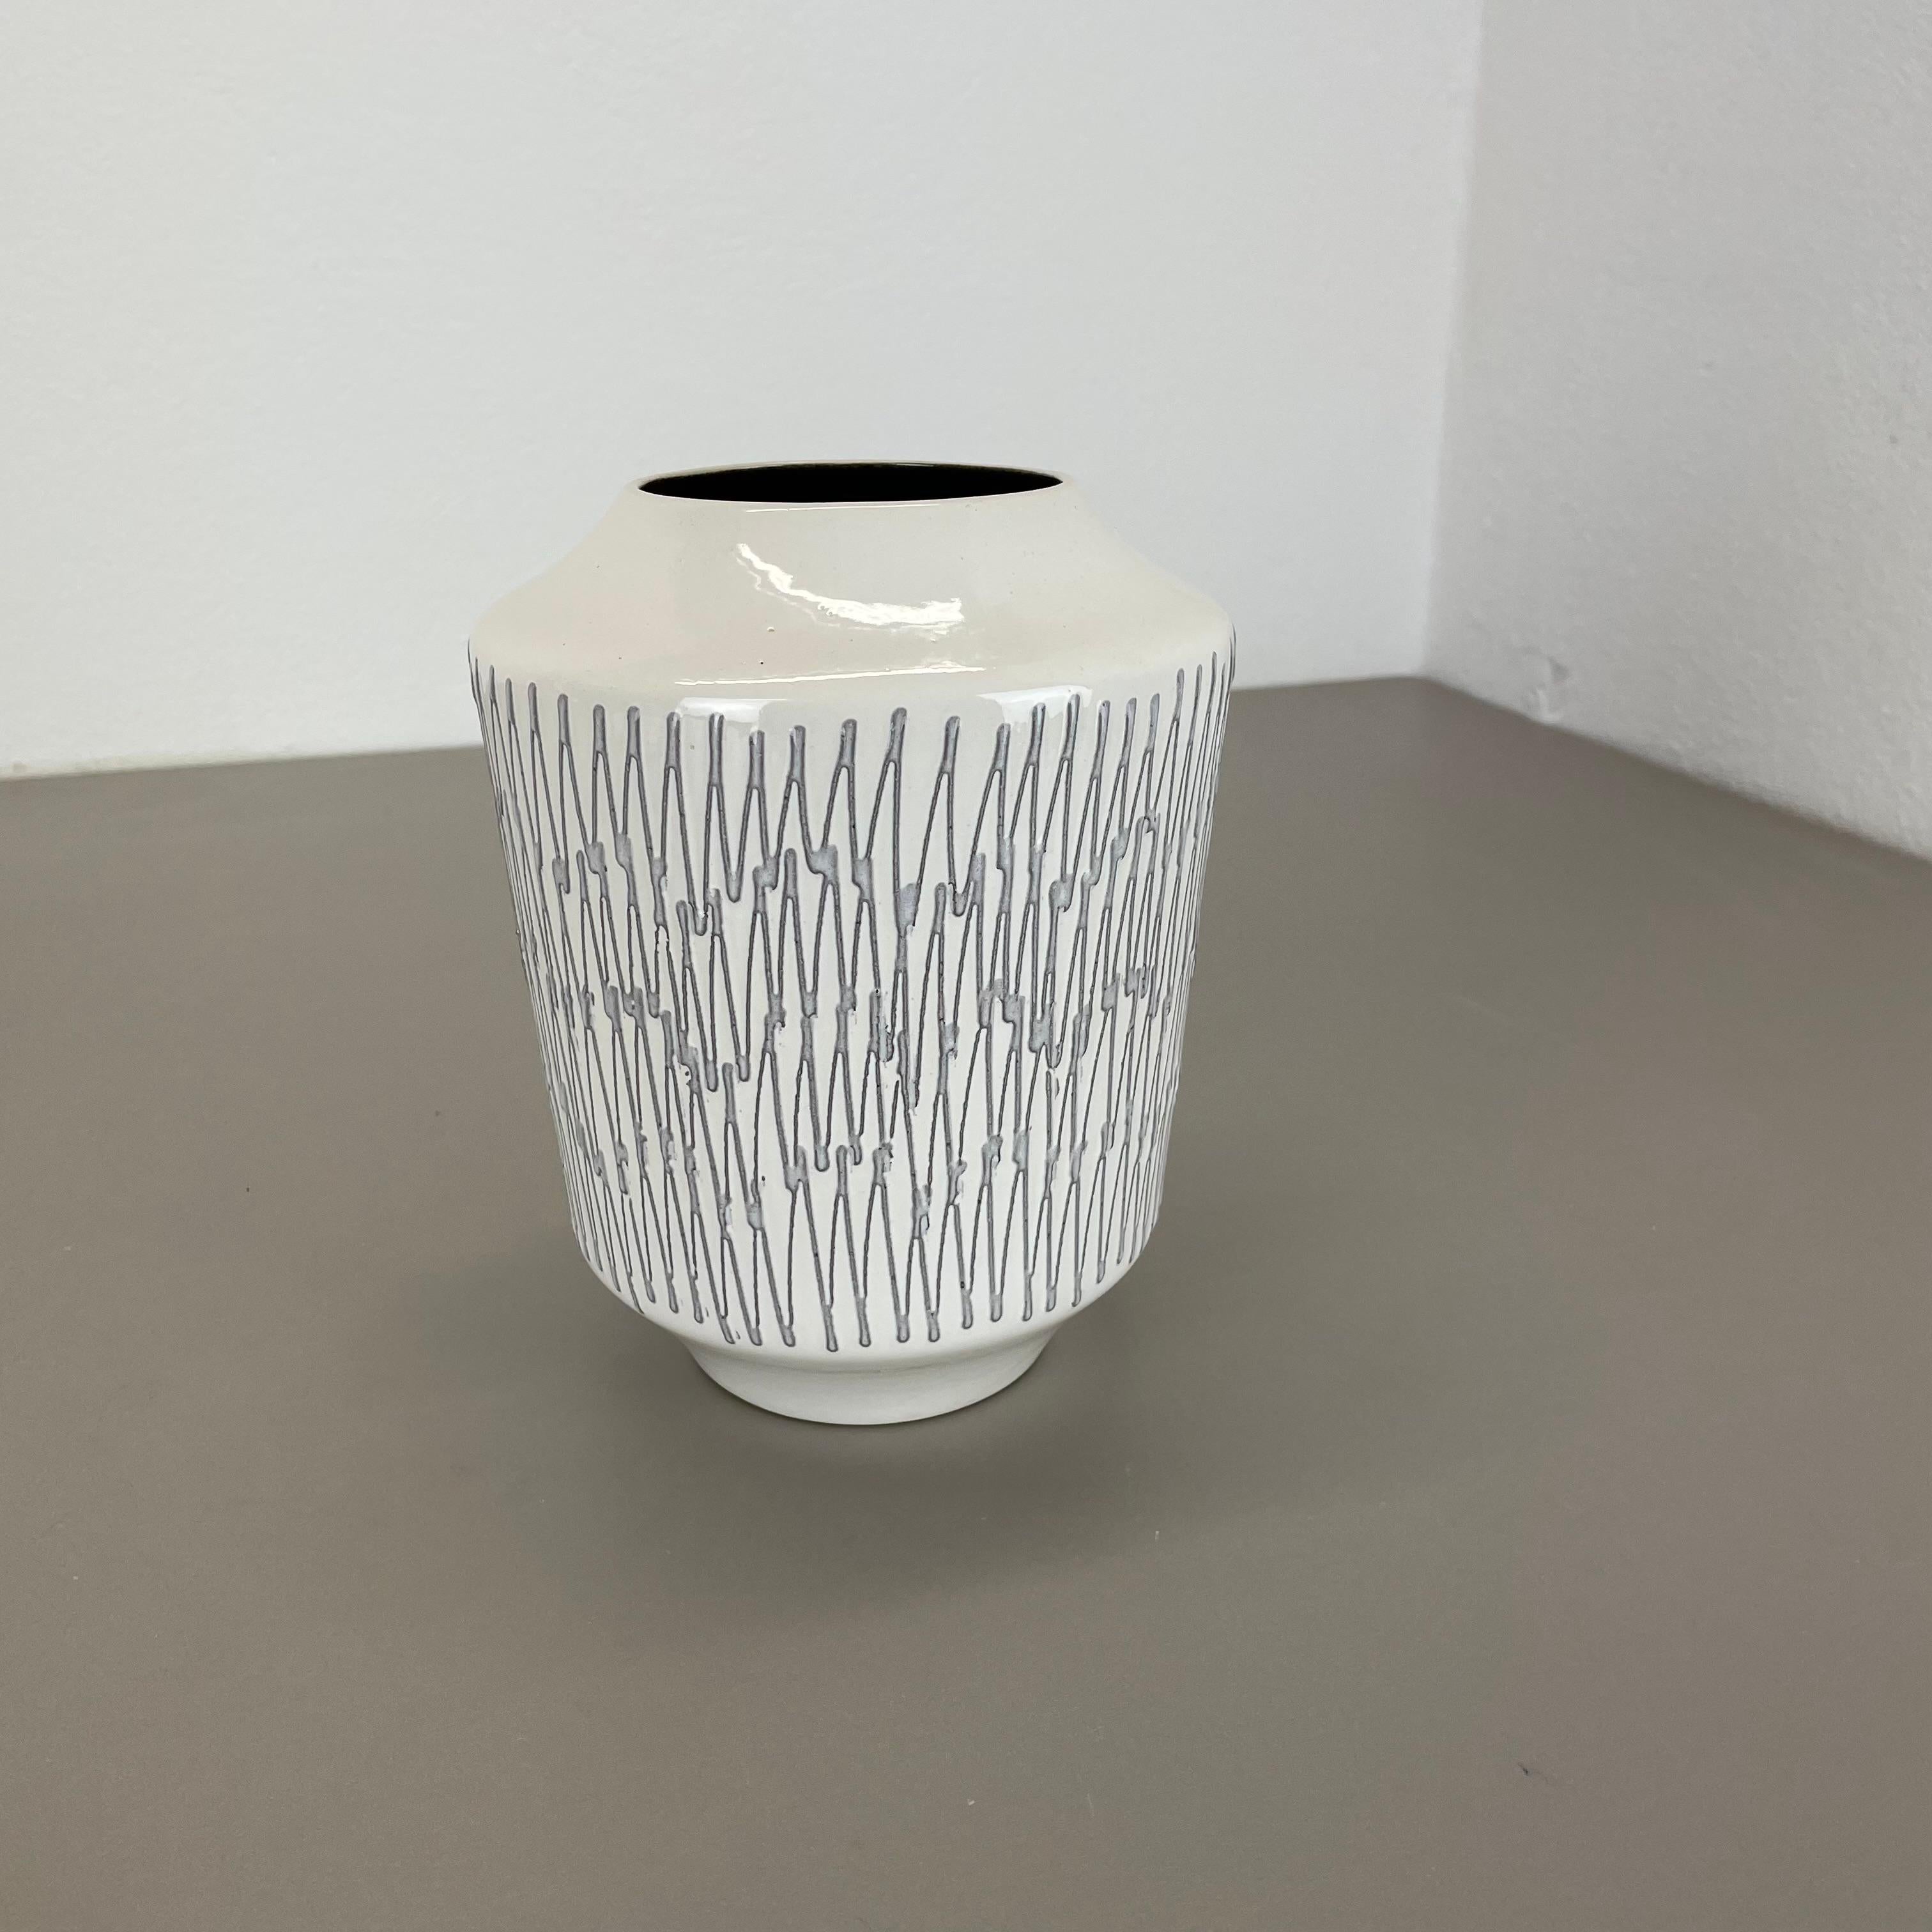 Article:

Pottery ceramic vase 


Producer:

ILKRA Ceramics, Germany


Decade:

1970s





Original vintage 1970s pottery ceramic vase made in Germany. High quality German production with a nice abstract brutalist surface glaze. The vase was